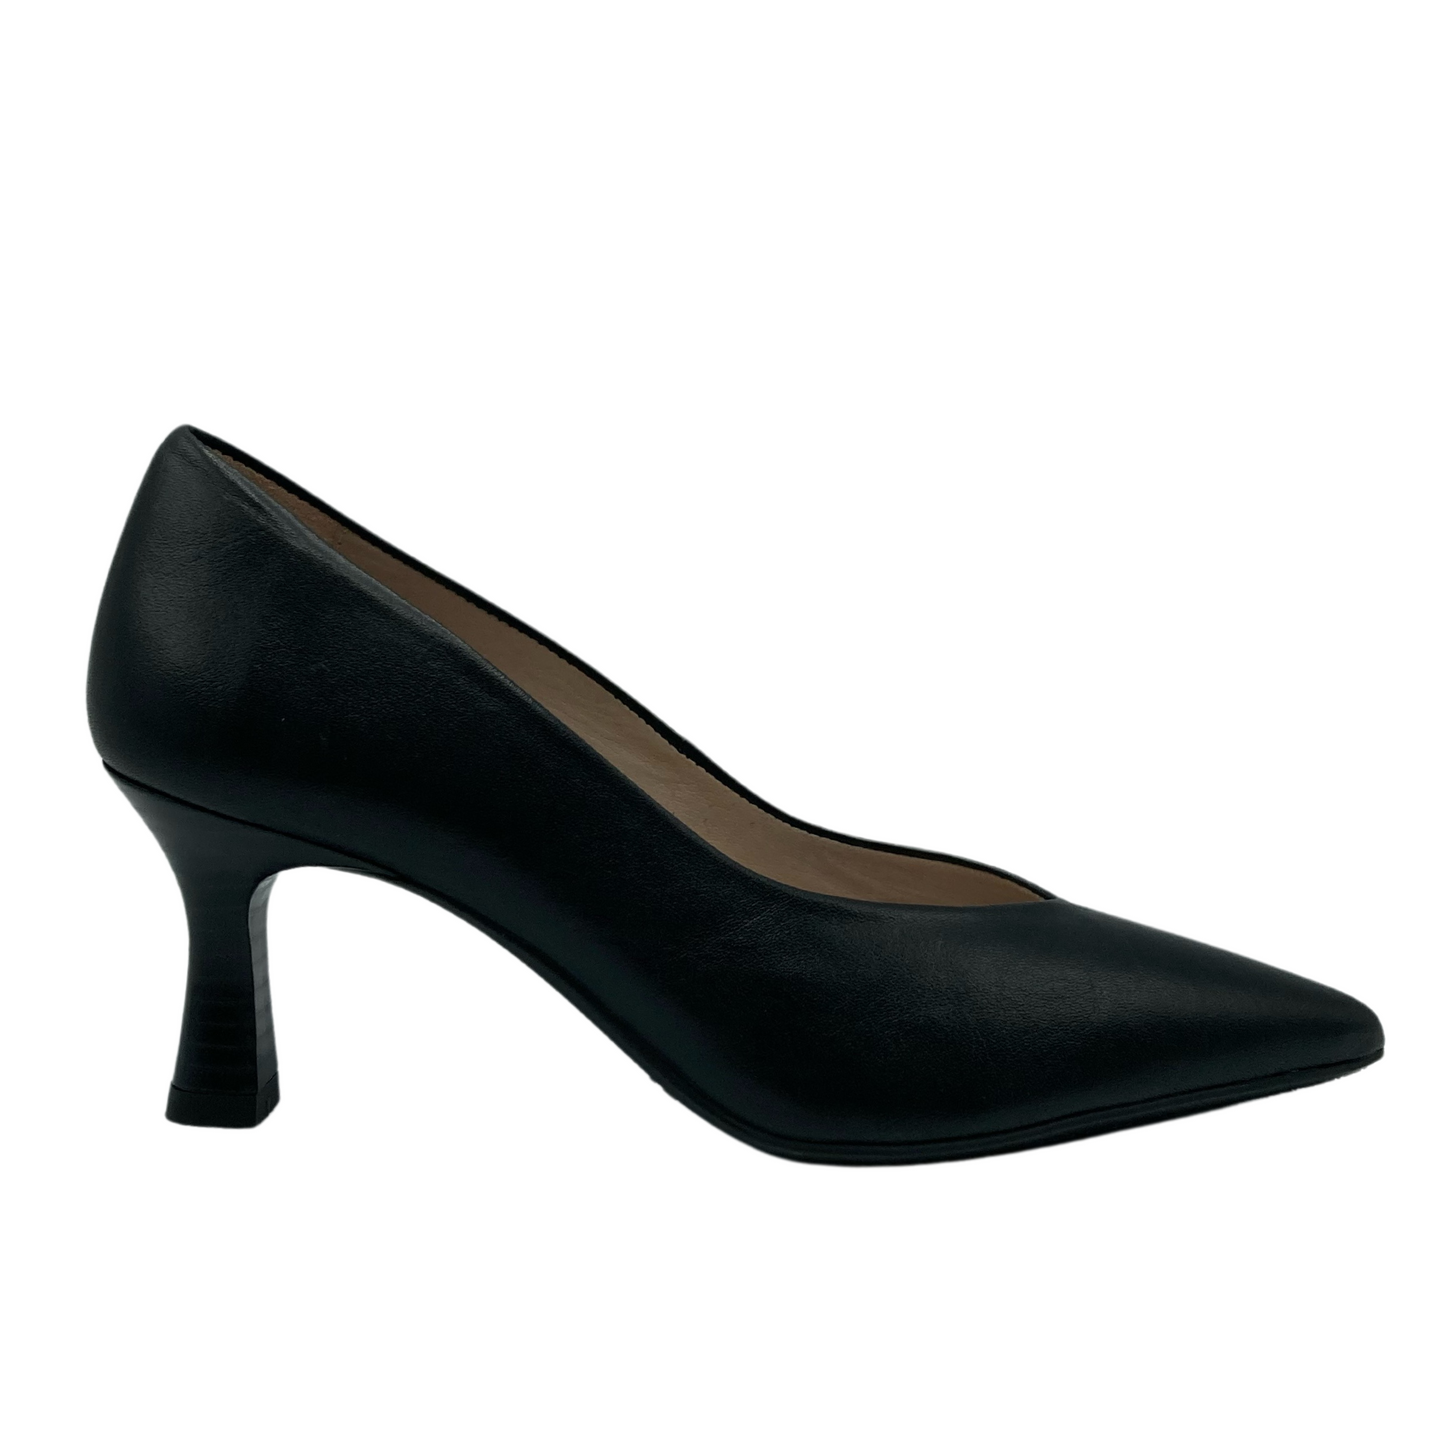 Right facing view of black leather pump with flared heel and pointed toe